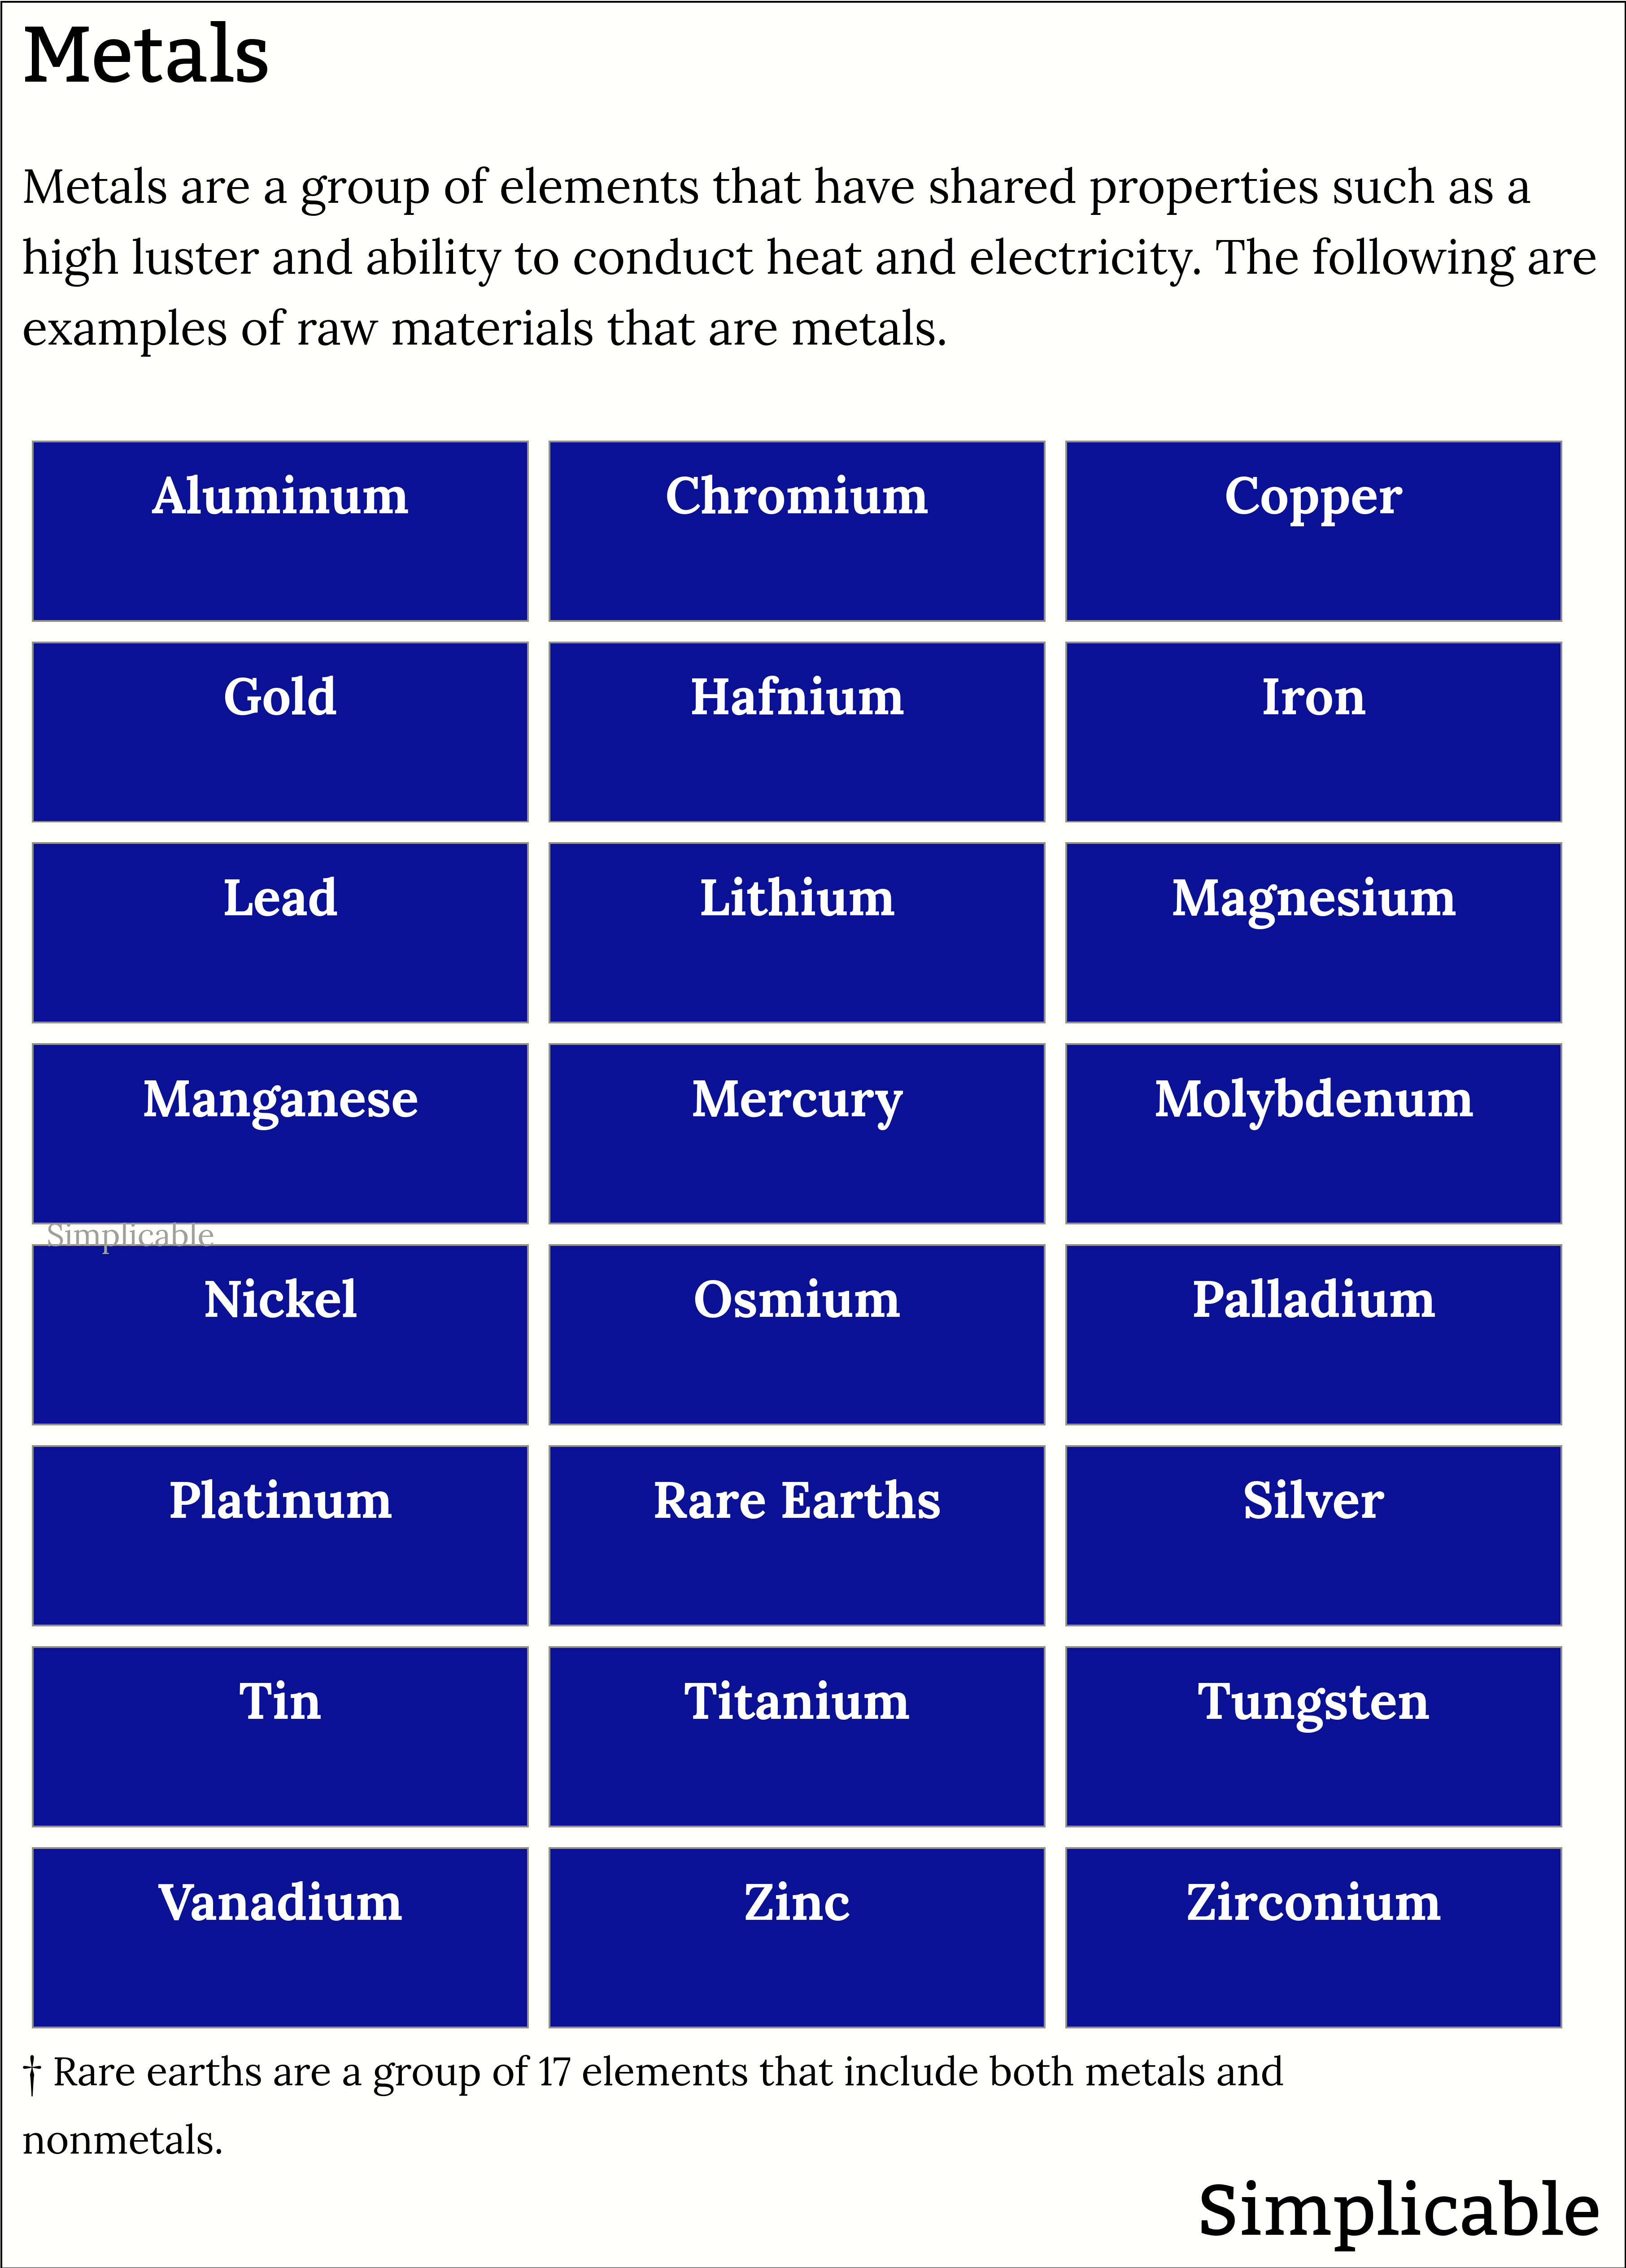 raw materials that are metals